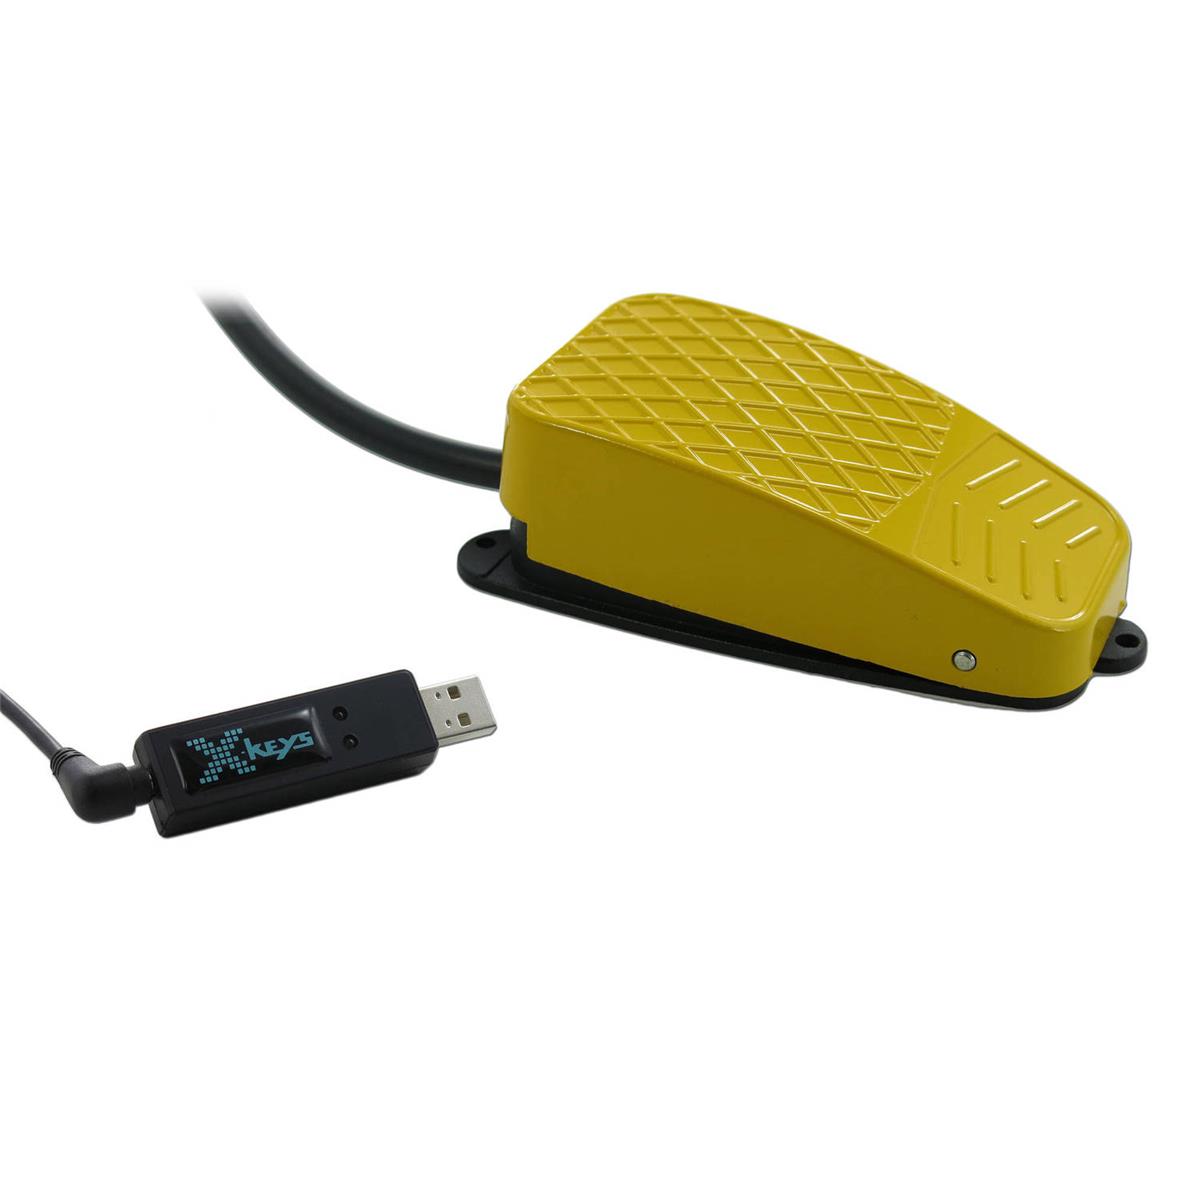 Image of X-Keys USB Three-Switch Interface with Yellow Commercial Foot Switch